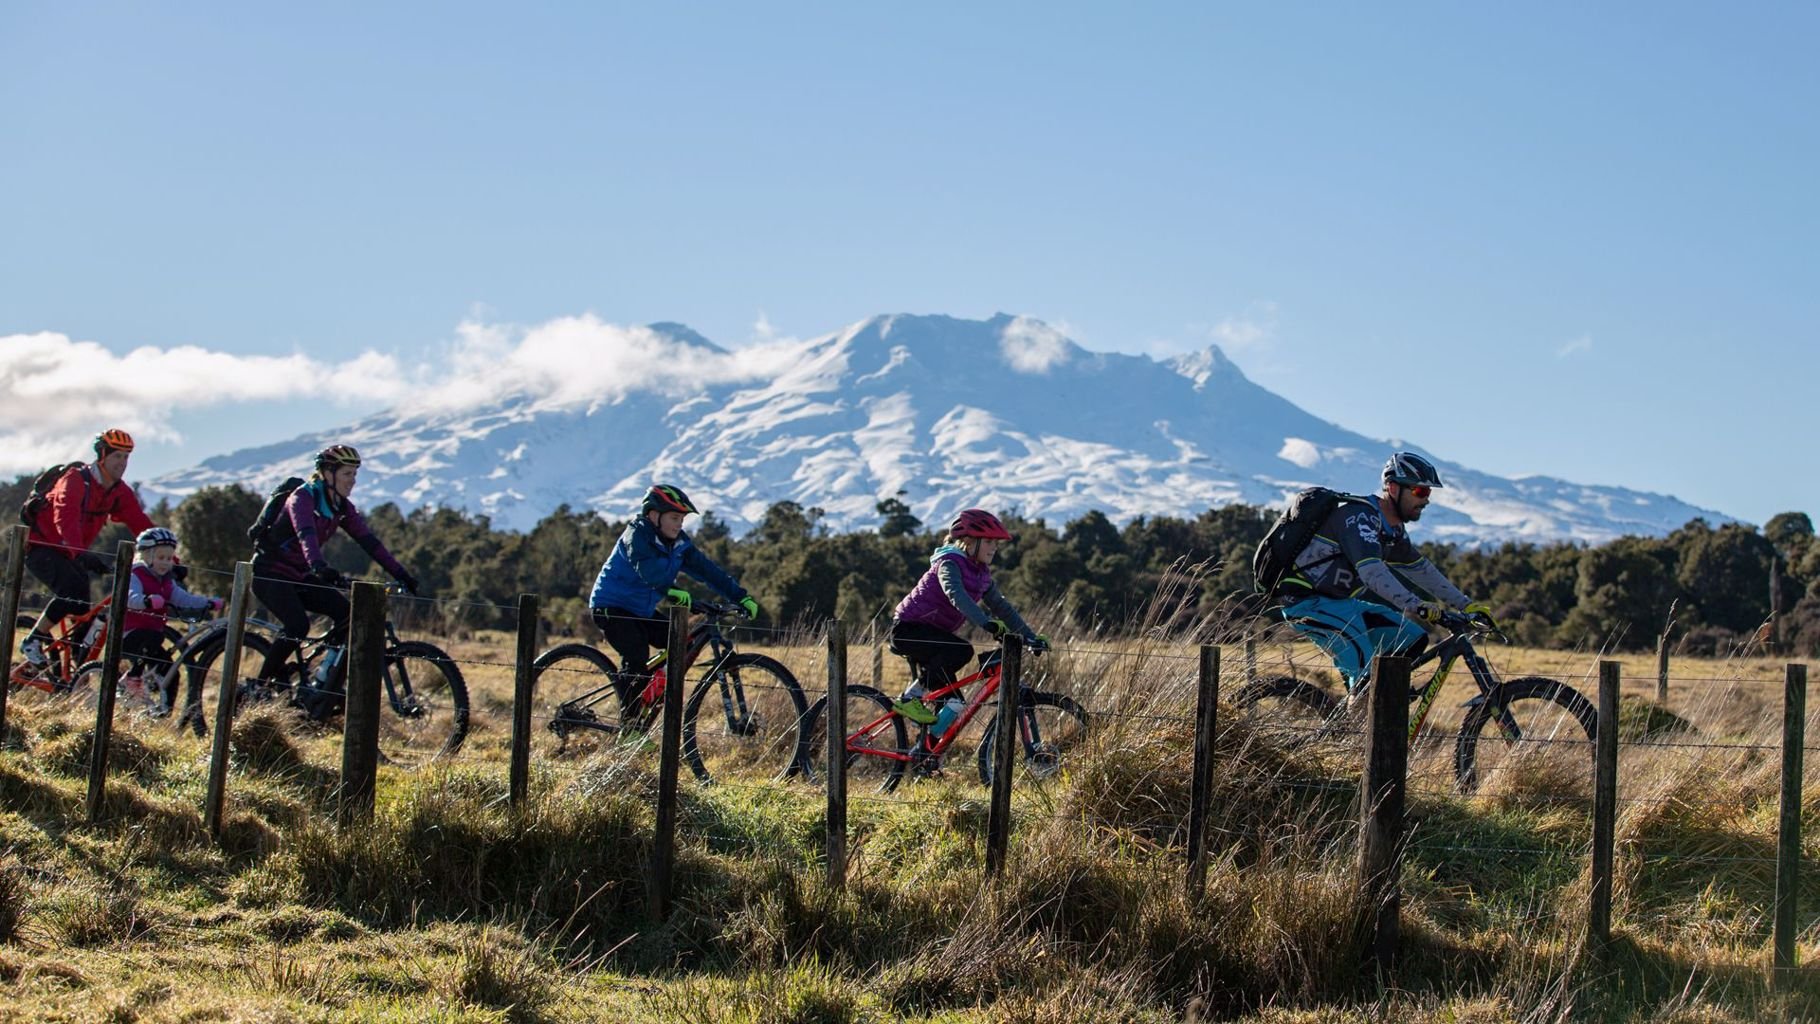 Group of friends cycling the start of the Ohakune Old Coach Road with Mt Ruapehu in the background - Visit Ruapehu.jpg